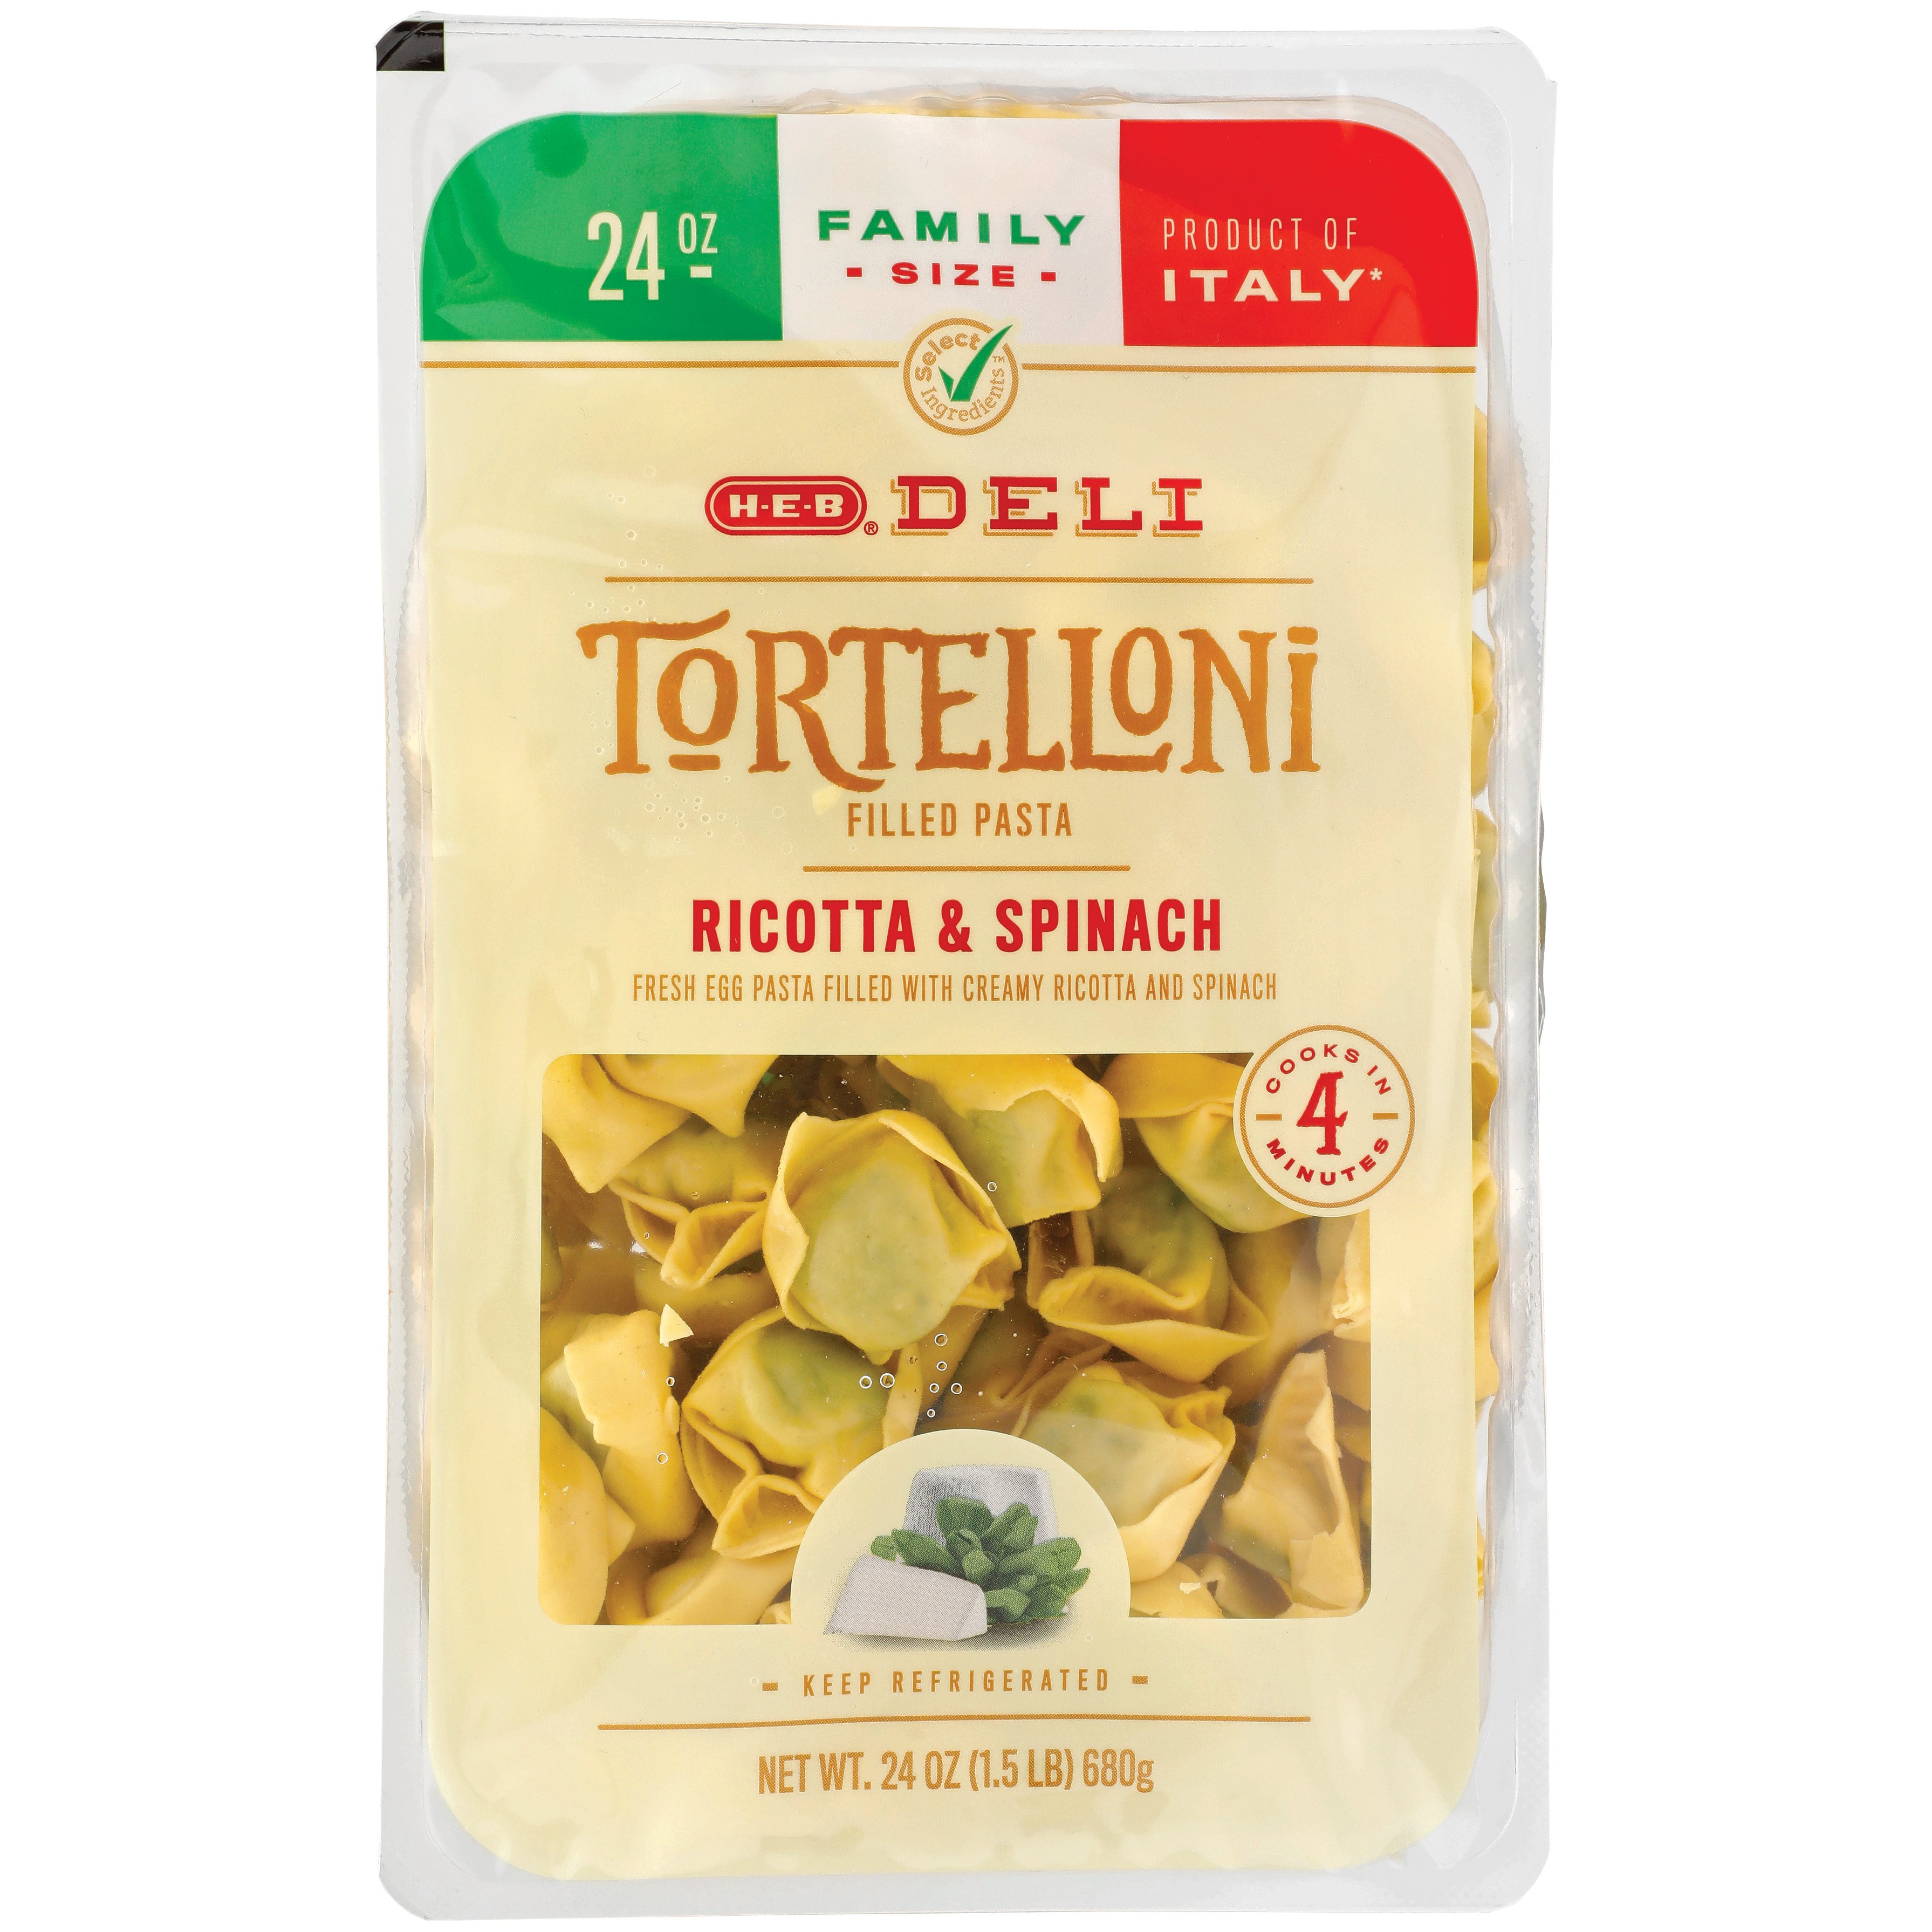 H-E-B Tortelloni Filled Pasta with Ricotta and Spinach, Family Size - Shop  Ready Meals & Snacks at H-E-B